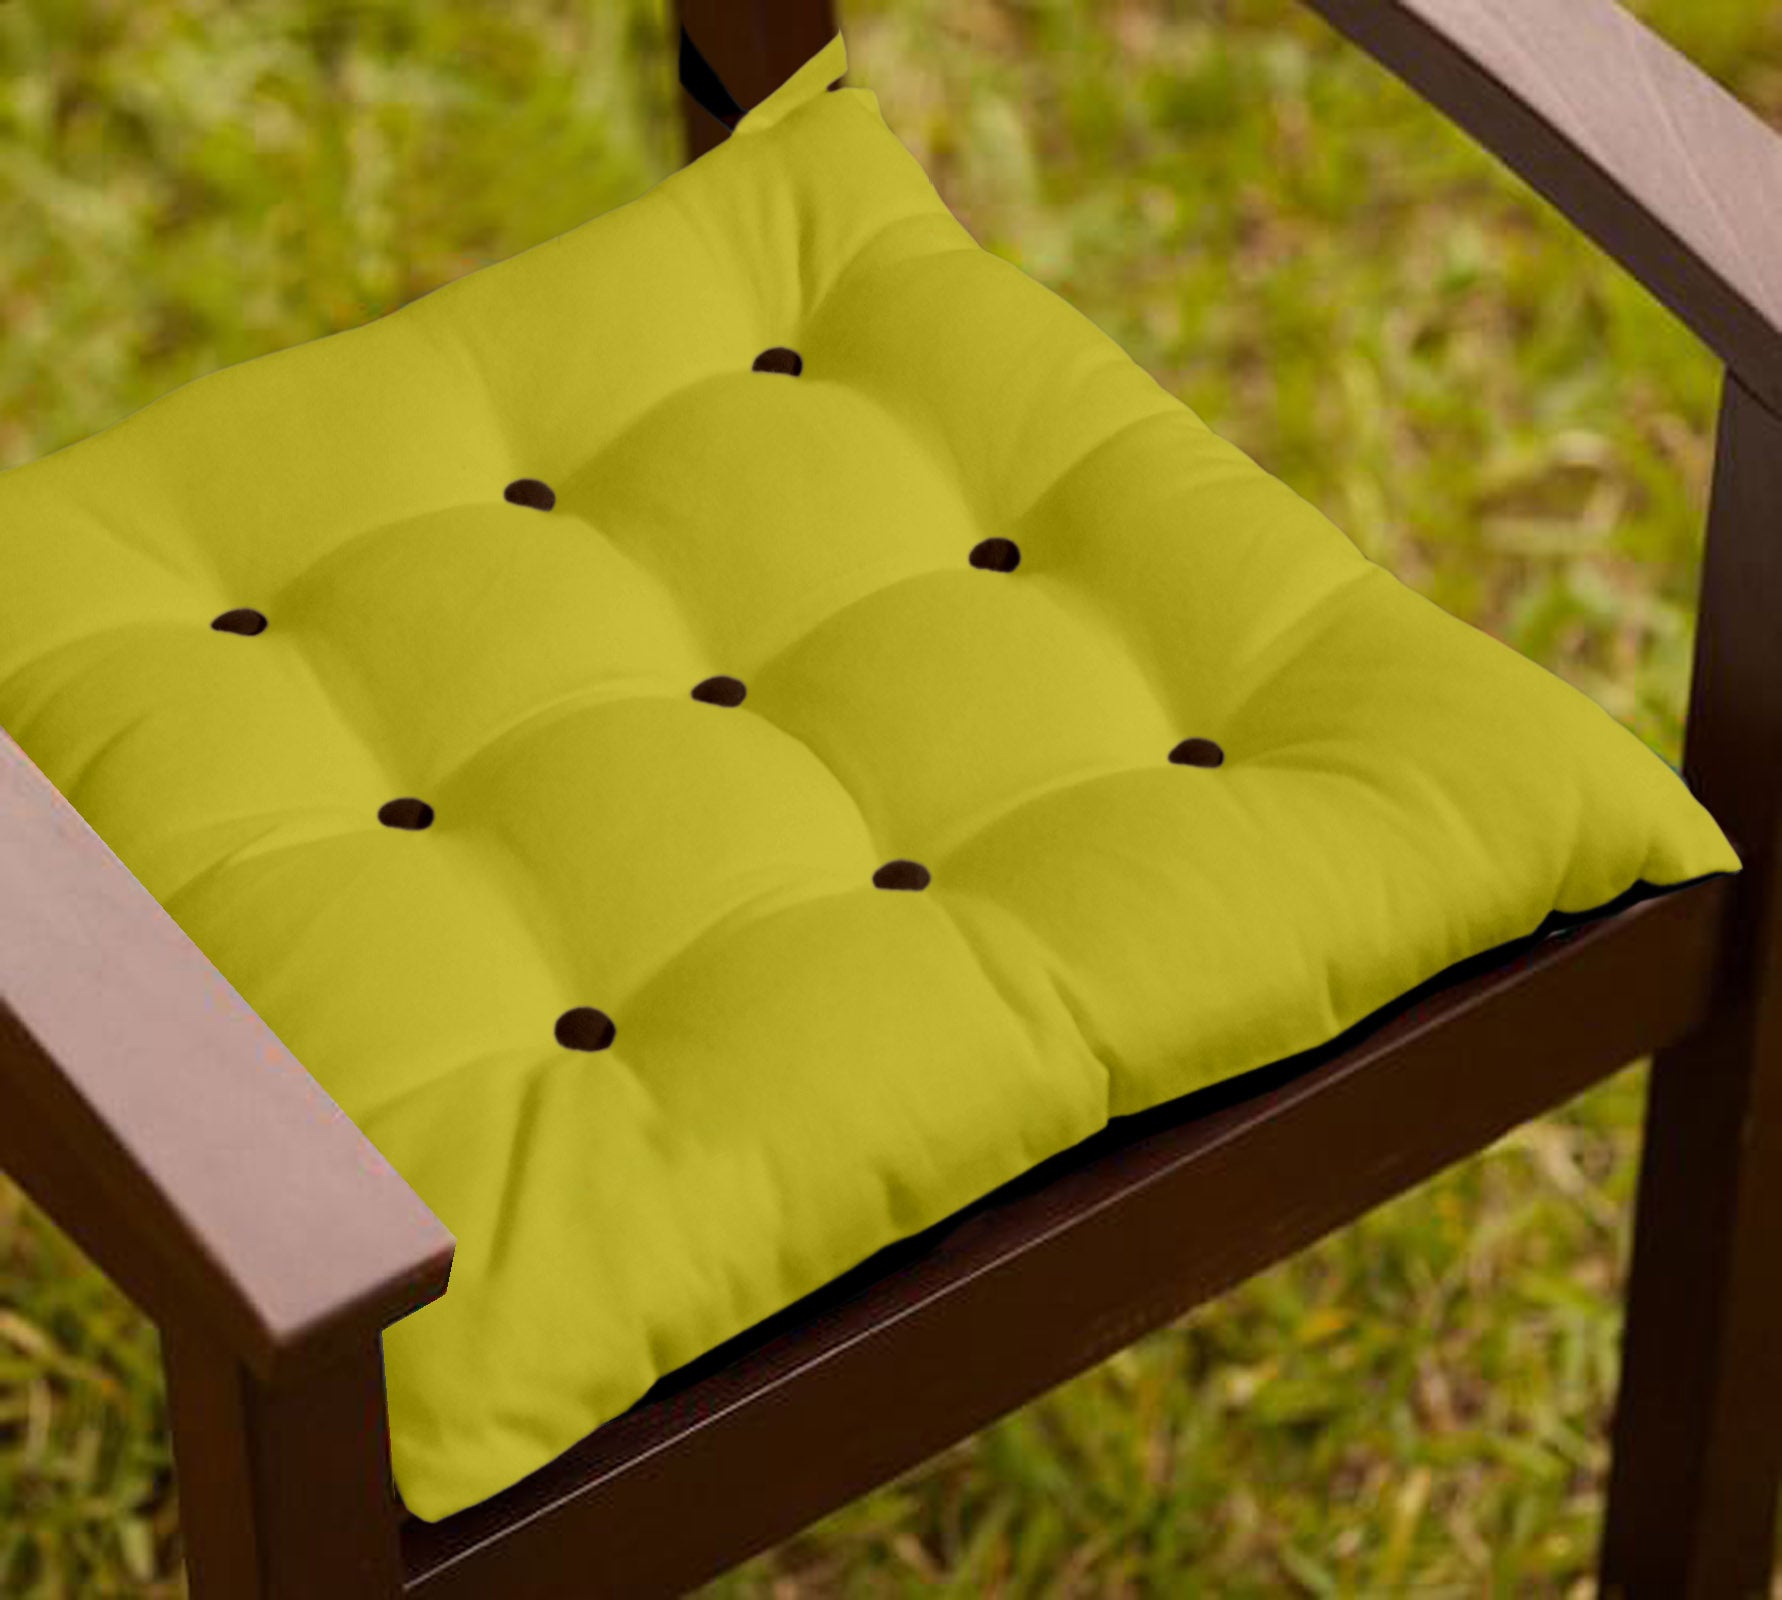 Lushomes Chair pads, Yellow and Brown, driver seat cushion for car, dining chair cushion, cushion for car, tie up cushions for chairs, Cotton Cushion for Car(16 Inch x16 Inch, 9 Buttons, Single Pc)